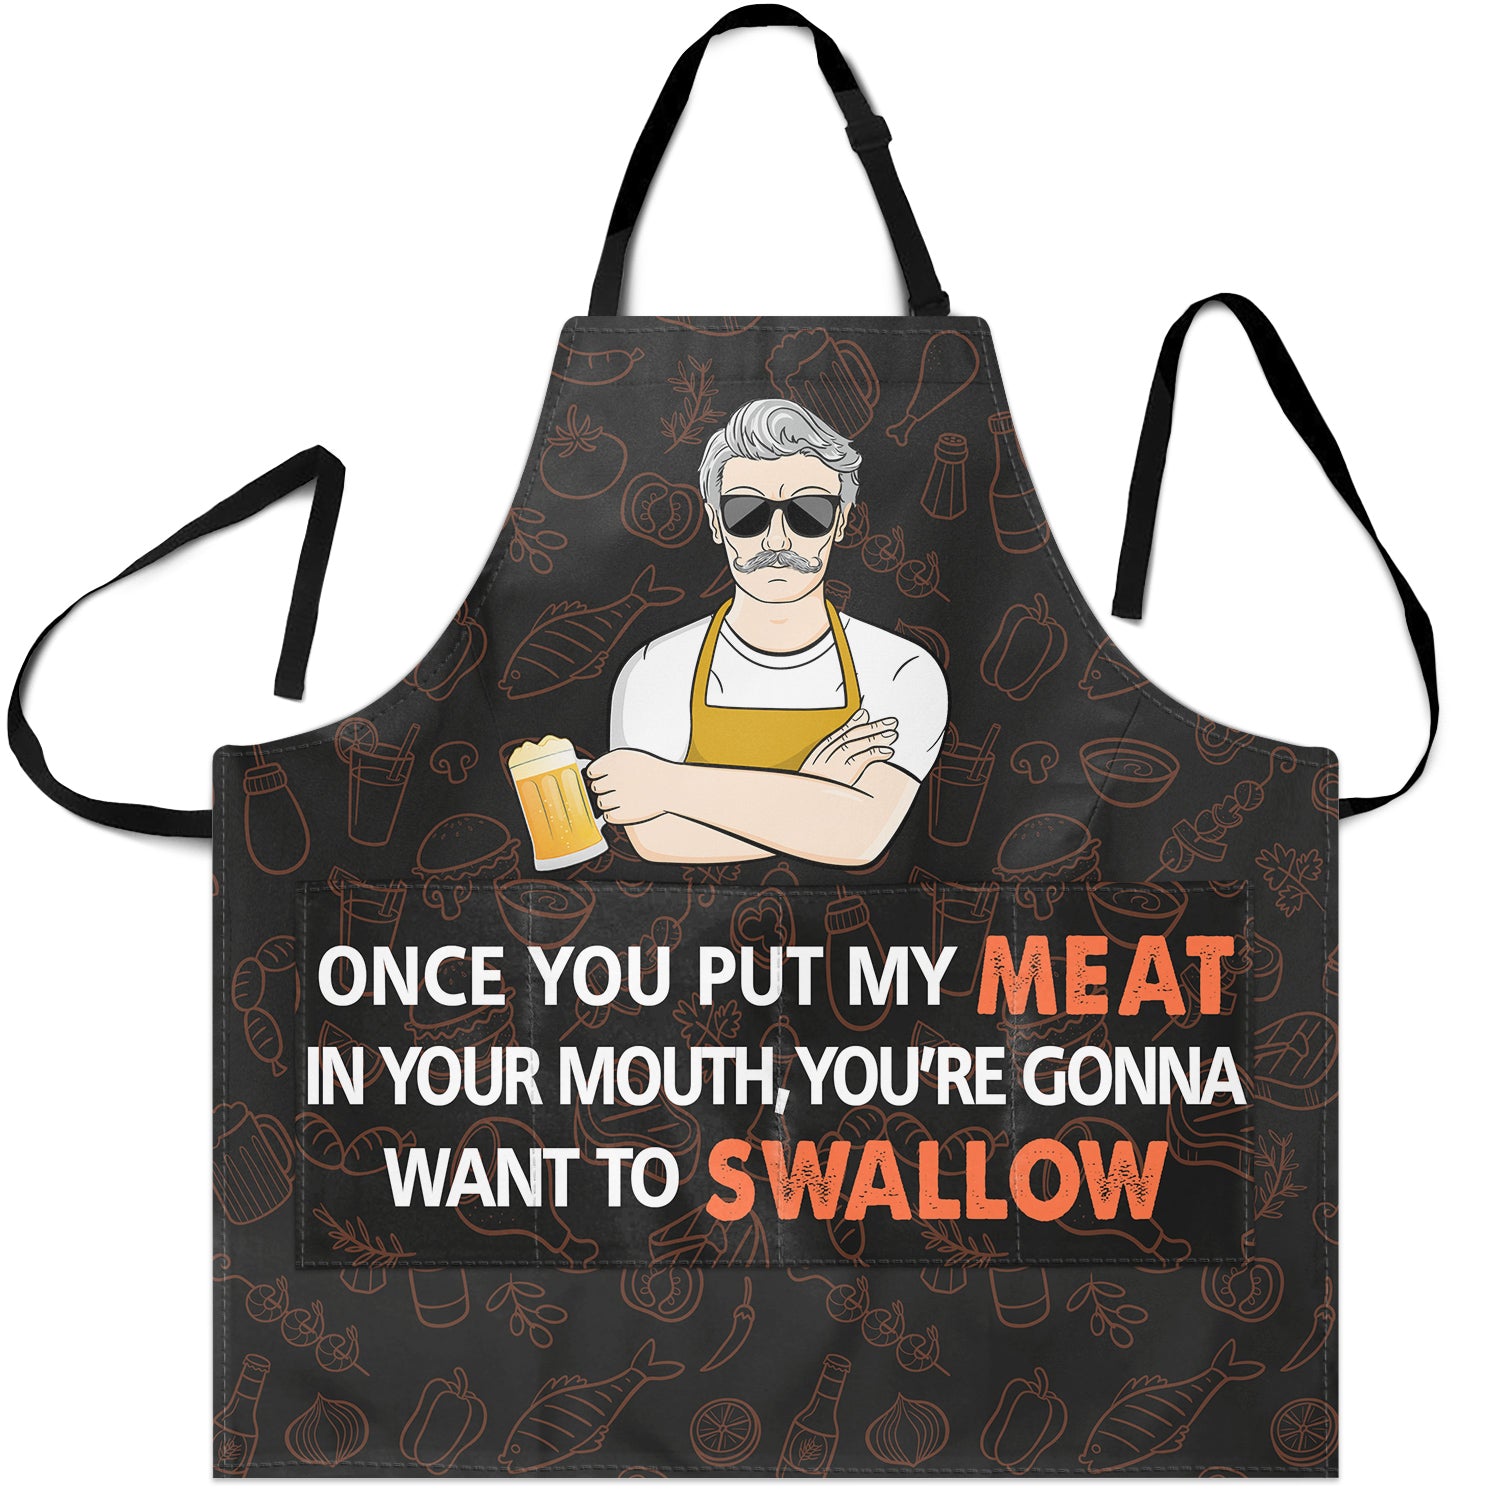 Once You Put My Meat In Your Mouth - Birthday, Anniversary, Funny Gift For Men, Husband, Boyfriend, Dad - Personalized Apron